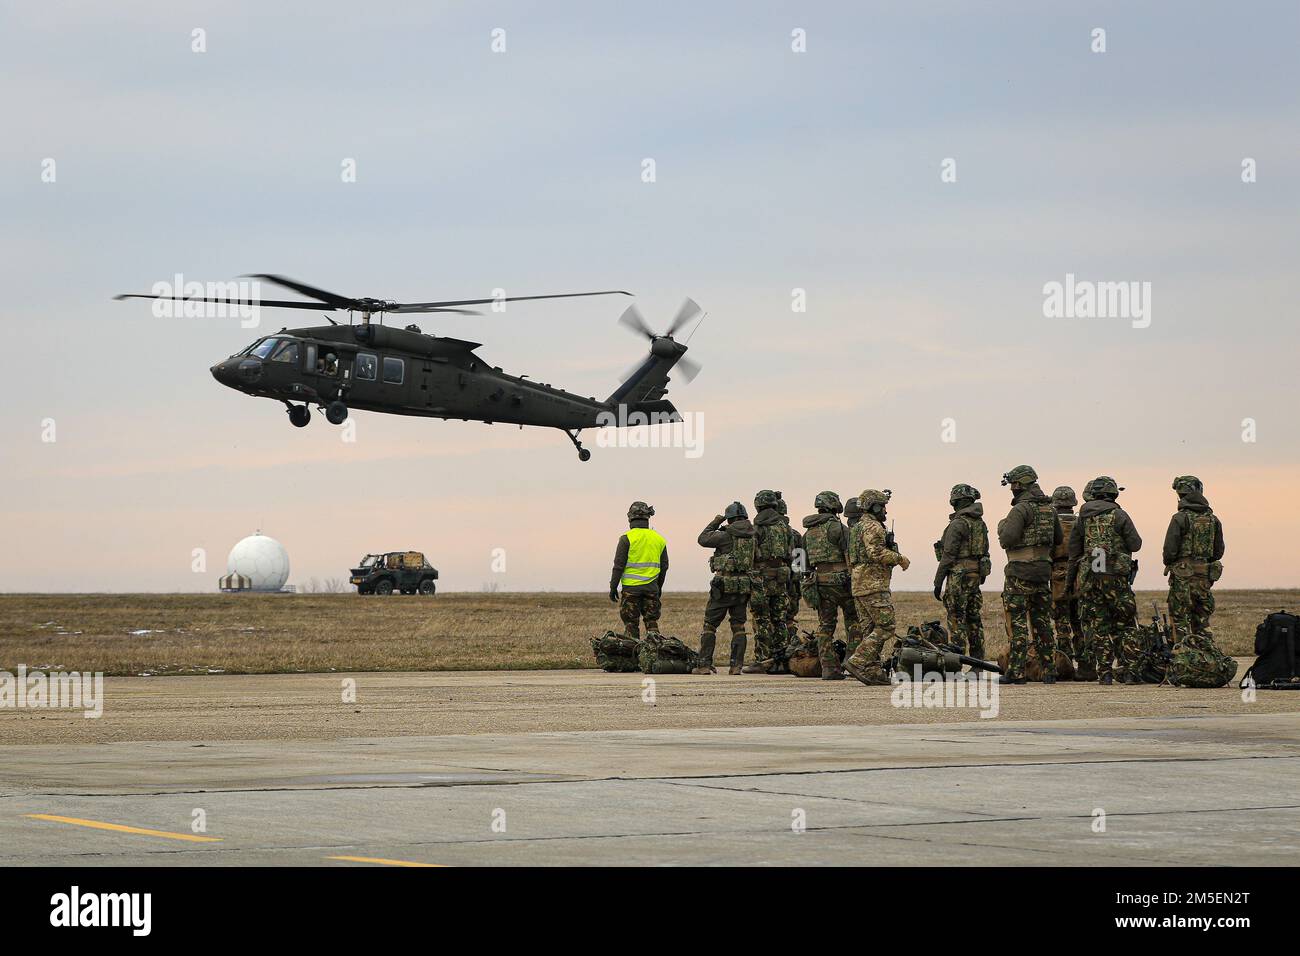 MIHAIL KOGALNICEANU AIR BASE, Romania – Soldiers of the Royal Netherlands 13th Air Assault Battalion,11th Air Assault Brigade prepare to board a 1st Air Cavalry Brigade UH60 Blackhawk during Rapid Falcon, MK Air Base, Romania, March 8, 2022.    Rapid Falcon is designed as a joint multinational exercise to increase operability and joint reaction capacity as well as the development of functional relationships between participating structures. Stock Photo